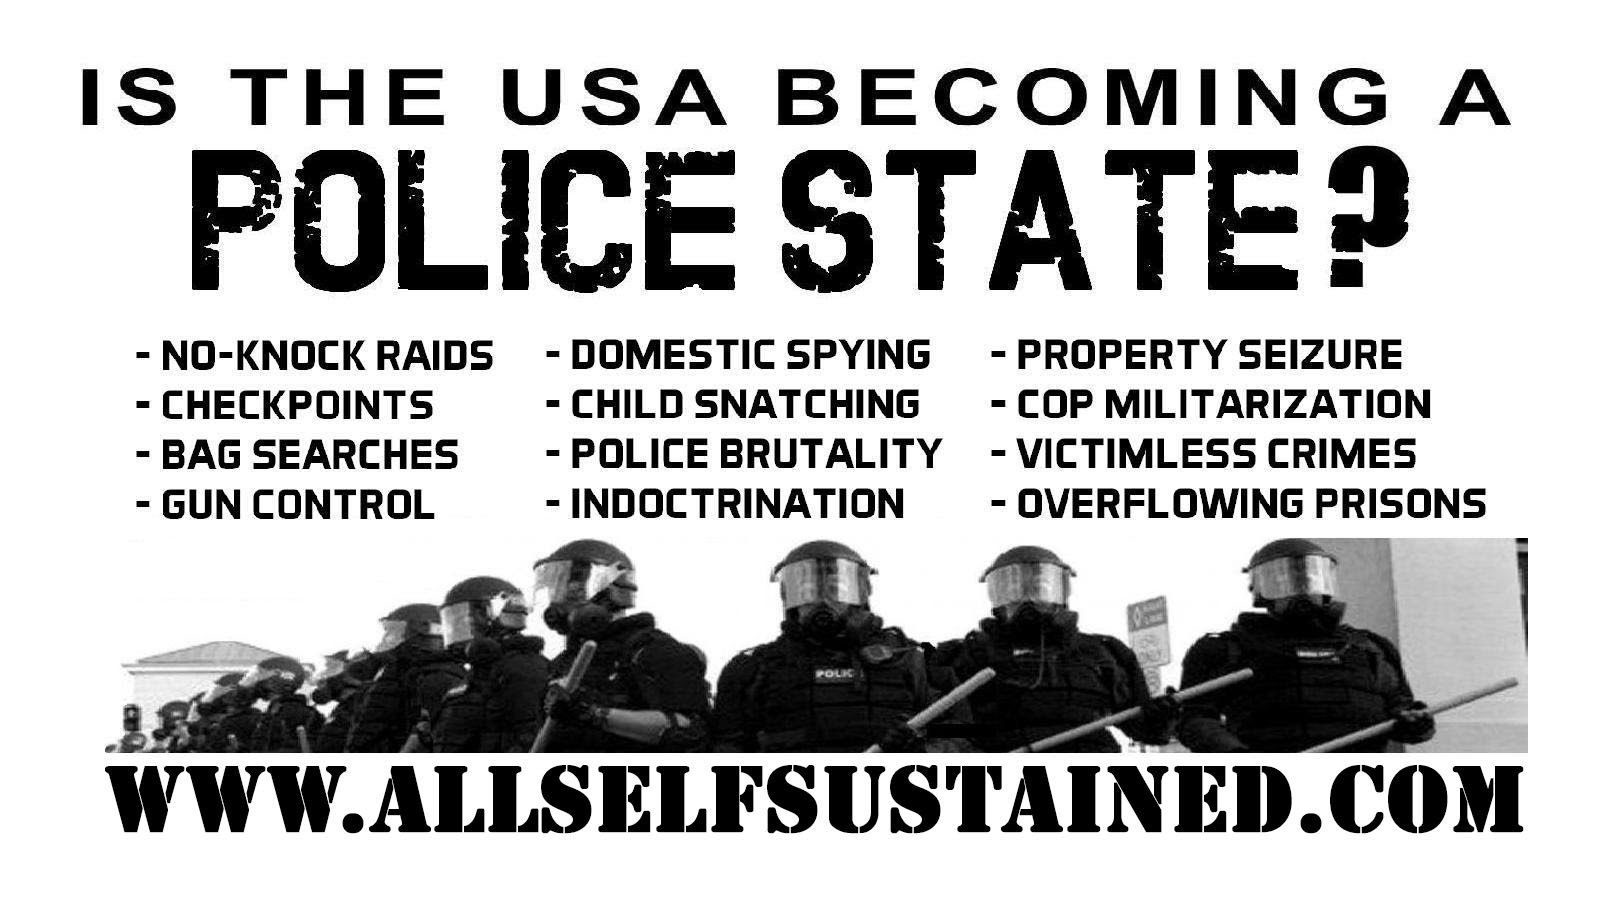 Are We Living in a Police State? If Someone Broke Into Your House Are You Just Going to Sit There If You Have the Means to Protect Your Family?